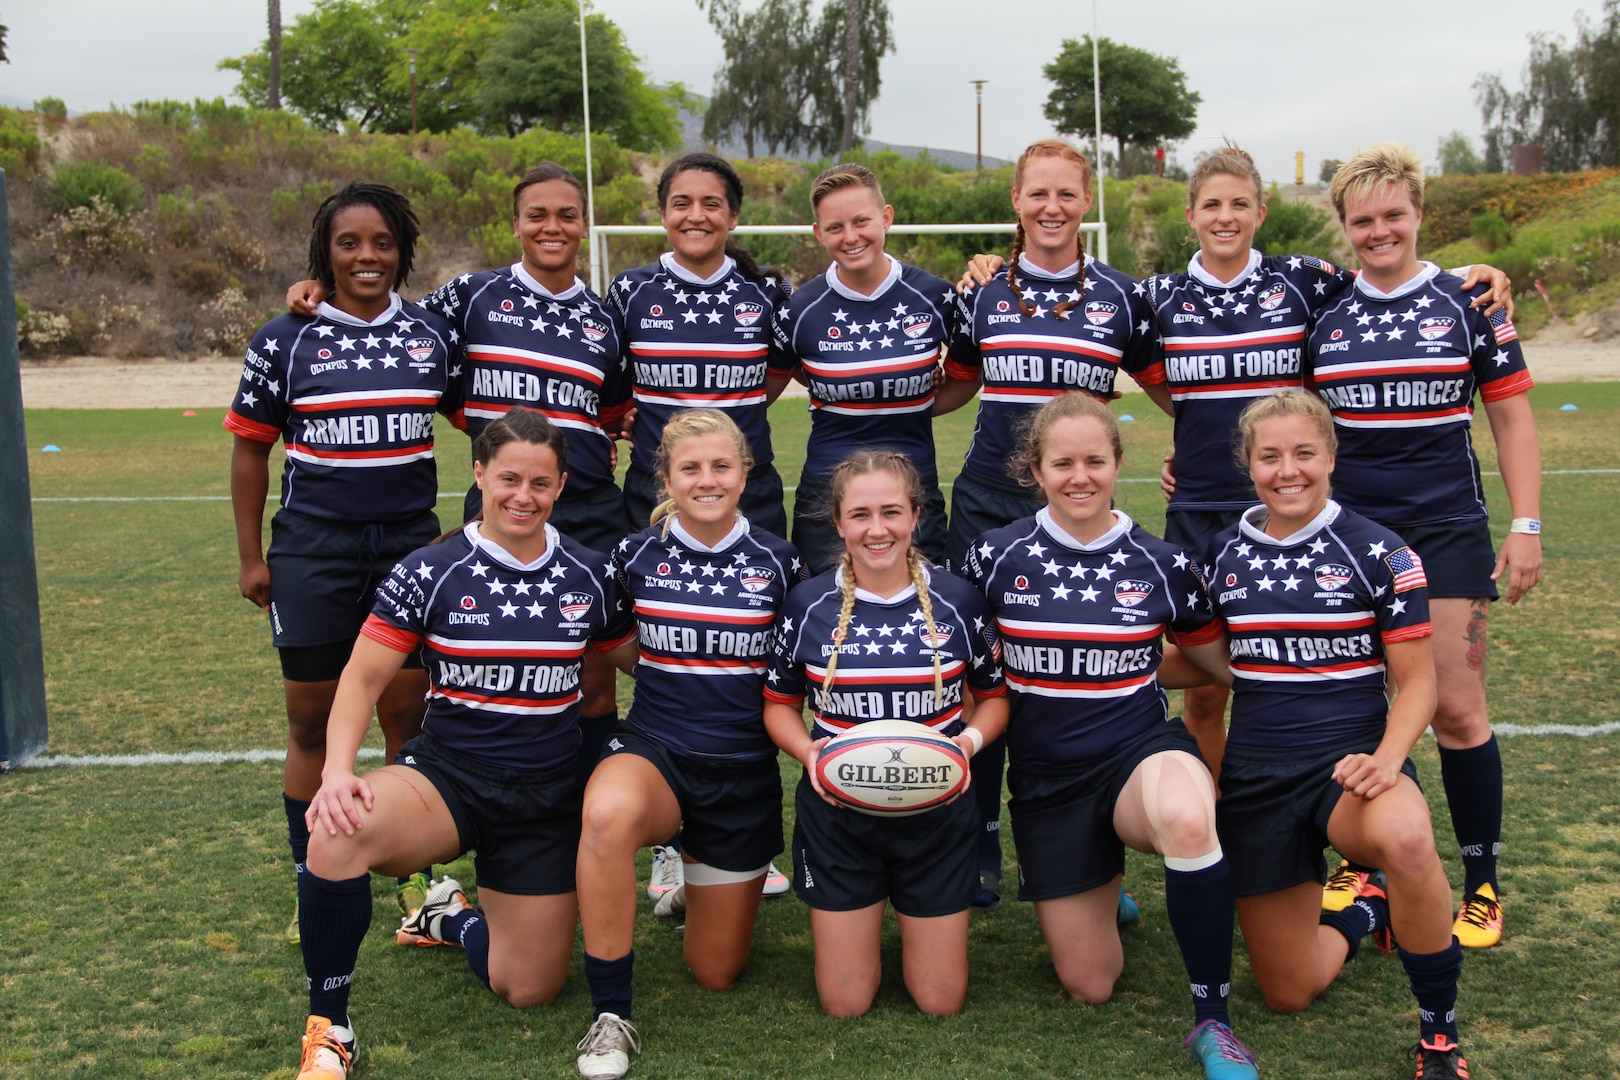 U.S. Armed Forces Women's Rugby Team competed in the  Women's Academy Tournament this week at the U.S. Olympic Training Site in Chula Vista, CA.